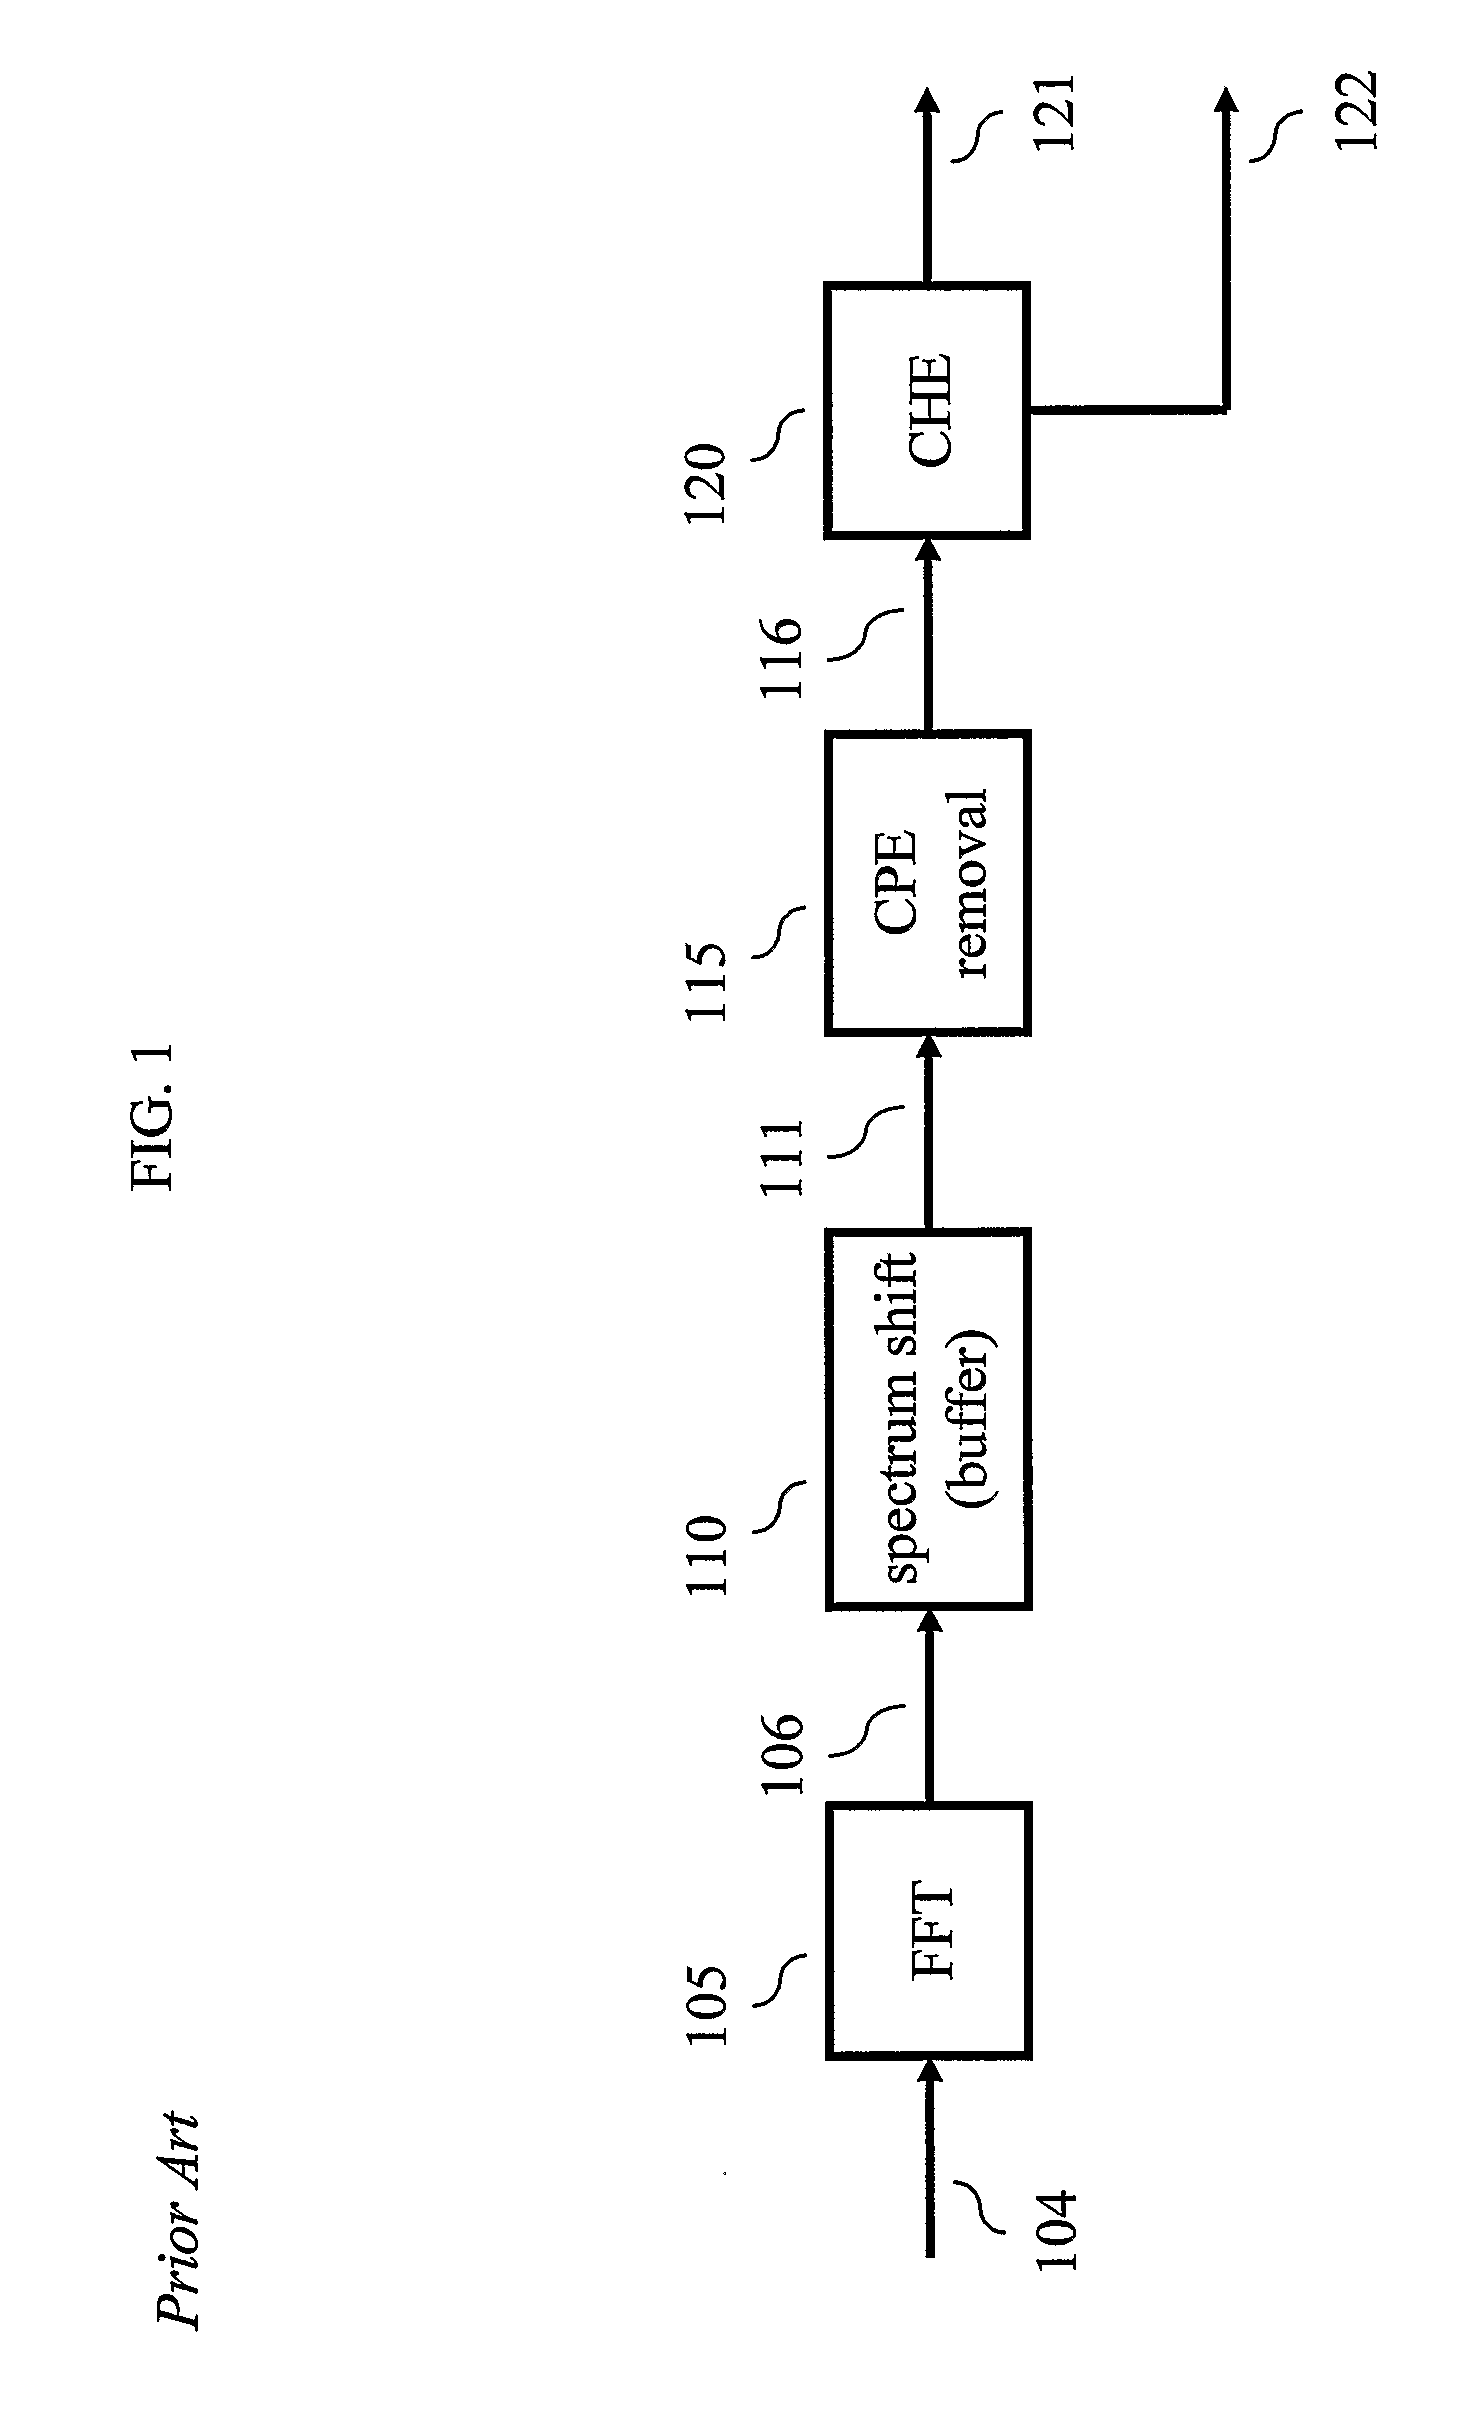 Apparatus and method for removing common phase error in a dvb-t/h receiver